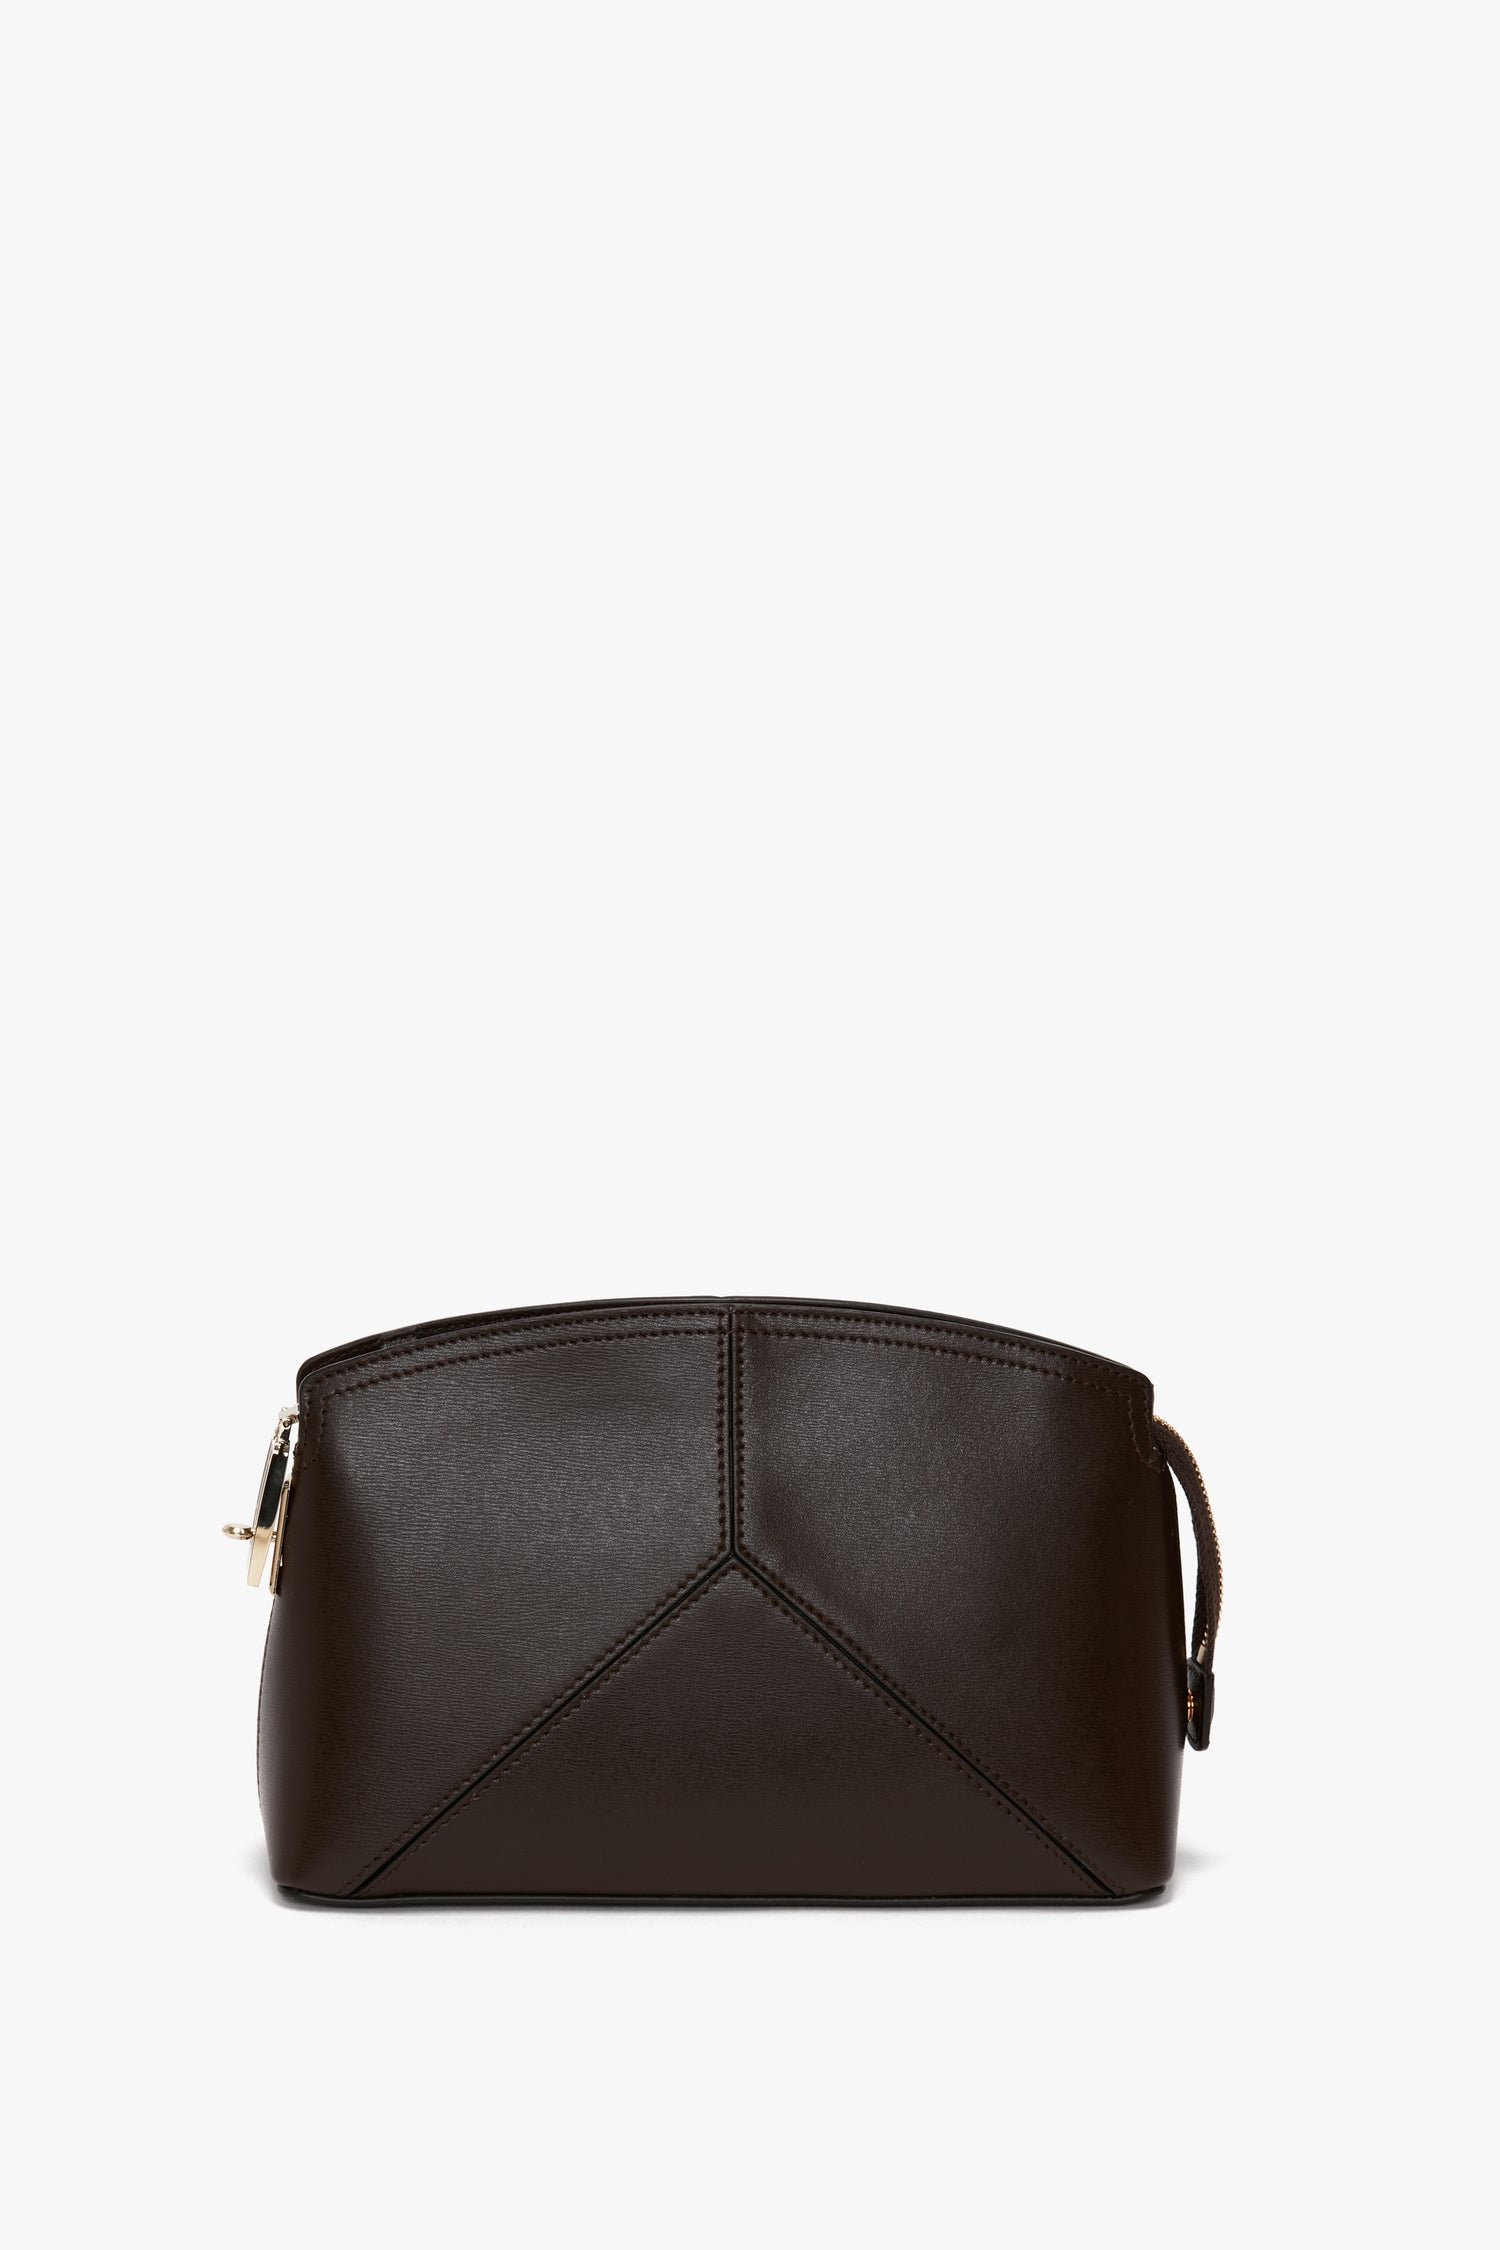 A small, structured Exclusive Victoria Crossbody Bag In Brown Leather by Victoria Beckham with sleek geometric lines, featuring a zipper closure and a short adjustable strap.